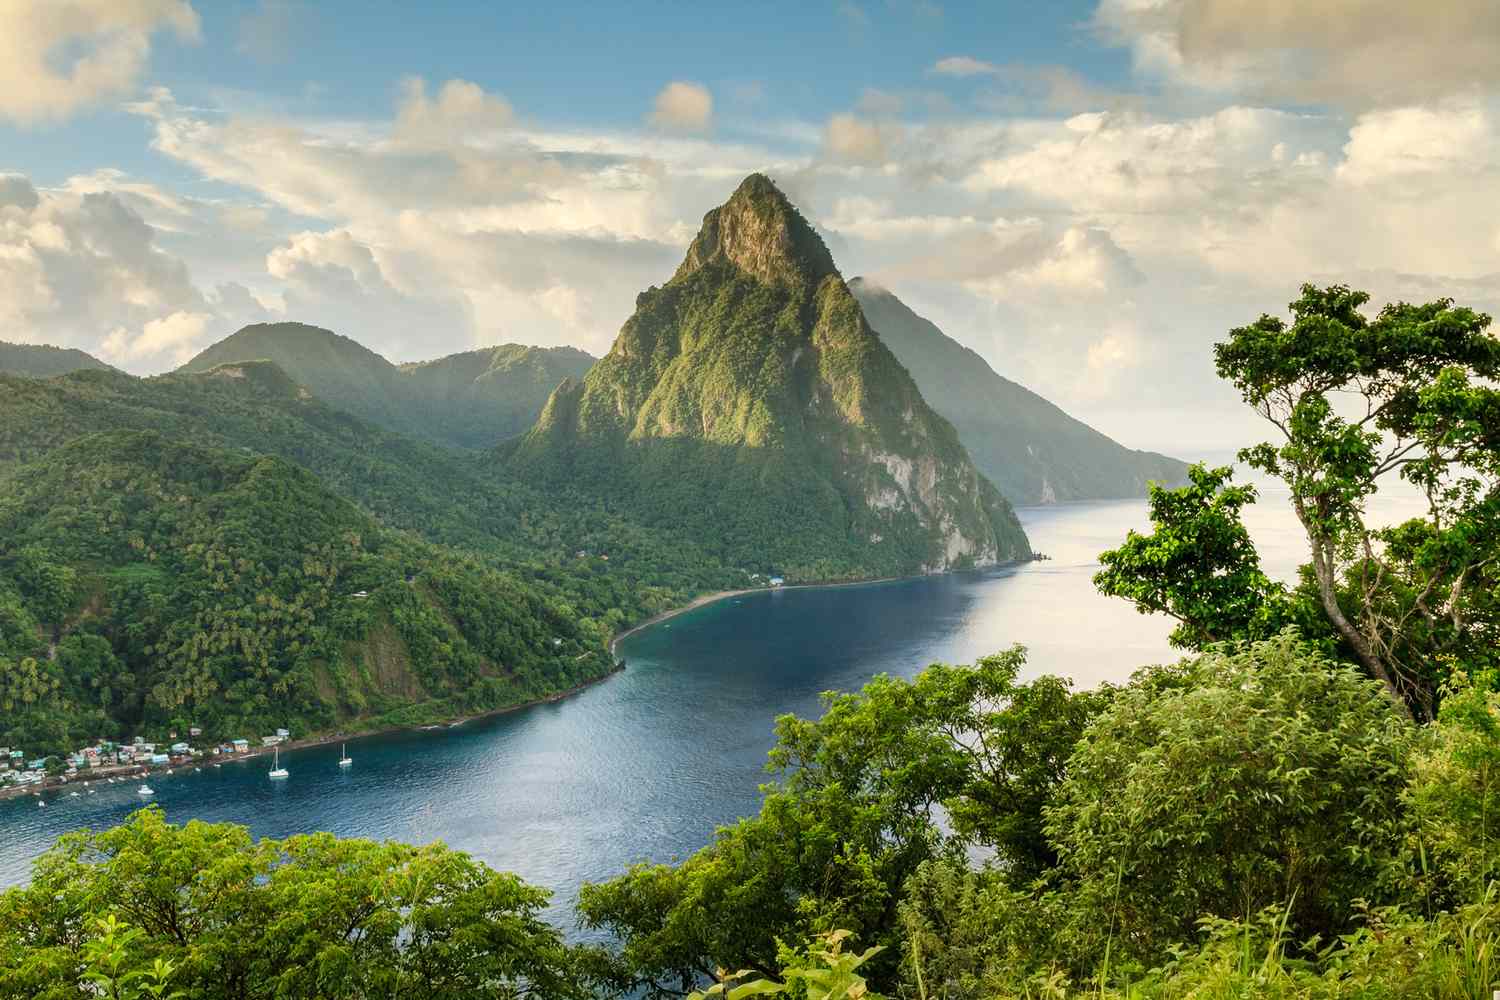 <p><span><span><span><span><span><span>The Pitons, rising dramatically from the Caribbean Sea on the island of St Lucia, present a breathtaking landscape that is both iconic and awe-inspiring. These twin volcanic spires, Gros Piton and Petit Piton, punctuate the island's southwestern coast, creating a UNESCO World Heritage site and a symbol of St Lucia's natural beauty.</span></span></span></span></span></span></p>  <p><span><span><span><span><span><span>Gros Piton, the taller of the two, stands at 2,619 feet, while Petit Piton reaches 2,461 feet, creating a mesmerizing scene that attracts adventurers, nature enthusiasts, and photographers alike. The Pitons are not just geological marvels; they embody the spirit of the Caribbean, offering a playground for hiking, bird-watching, and underwater exploration.</span></span></span></span></span></span></p>  <p><span><span><span><span><span><span>The viewpoint from the summit of Gros Piton provides a panoramic reward for the trek. It reveals St Lucia's coastline, the Caribbean Sea, and neighboring islands.</span></span></span></span></span></span></p>